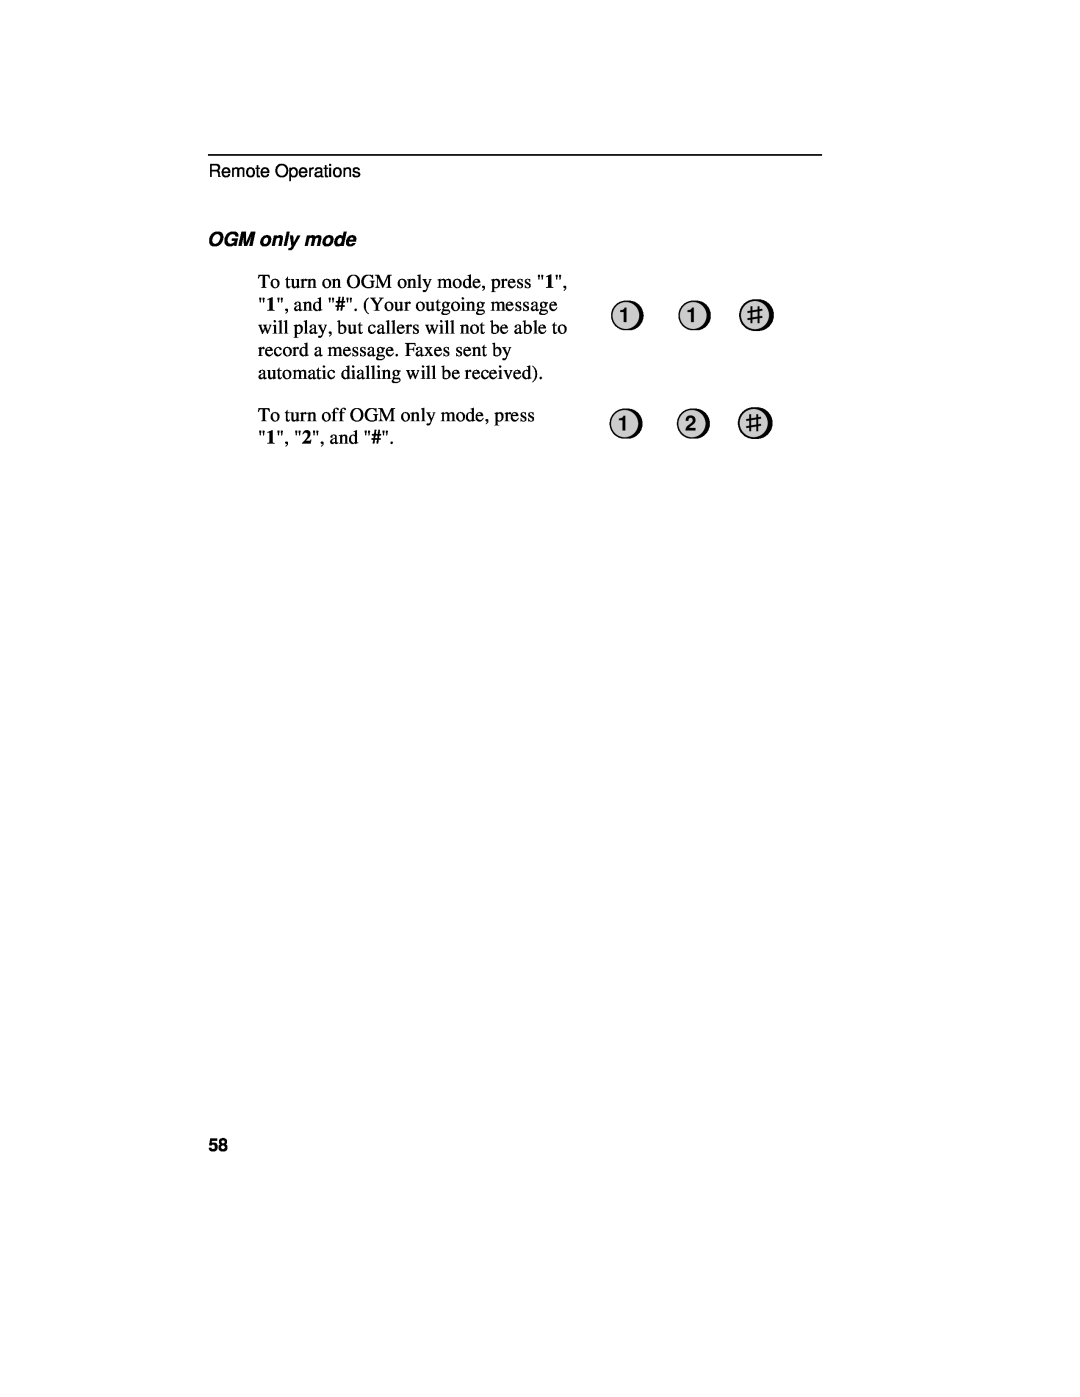 Sharp UX-460 operation manual To turn off OGM only mode, press 1, 2, and #, Remote Operations 